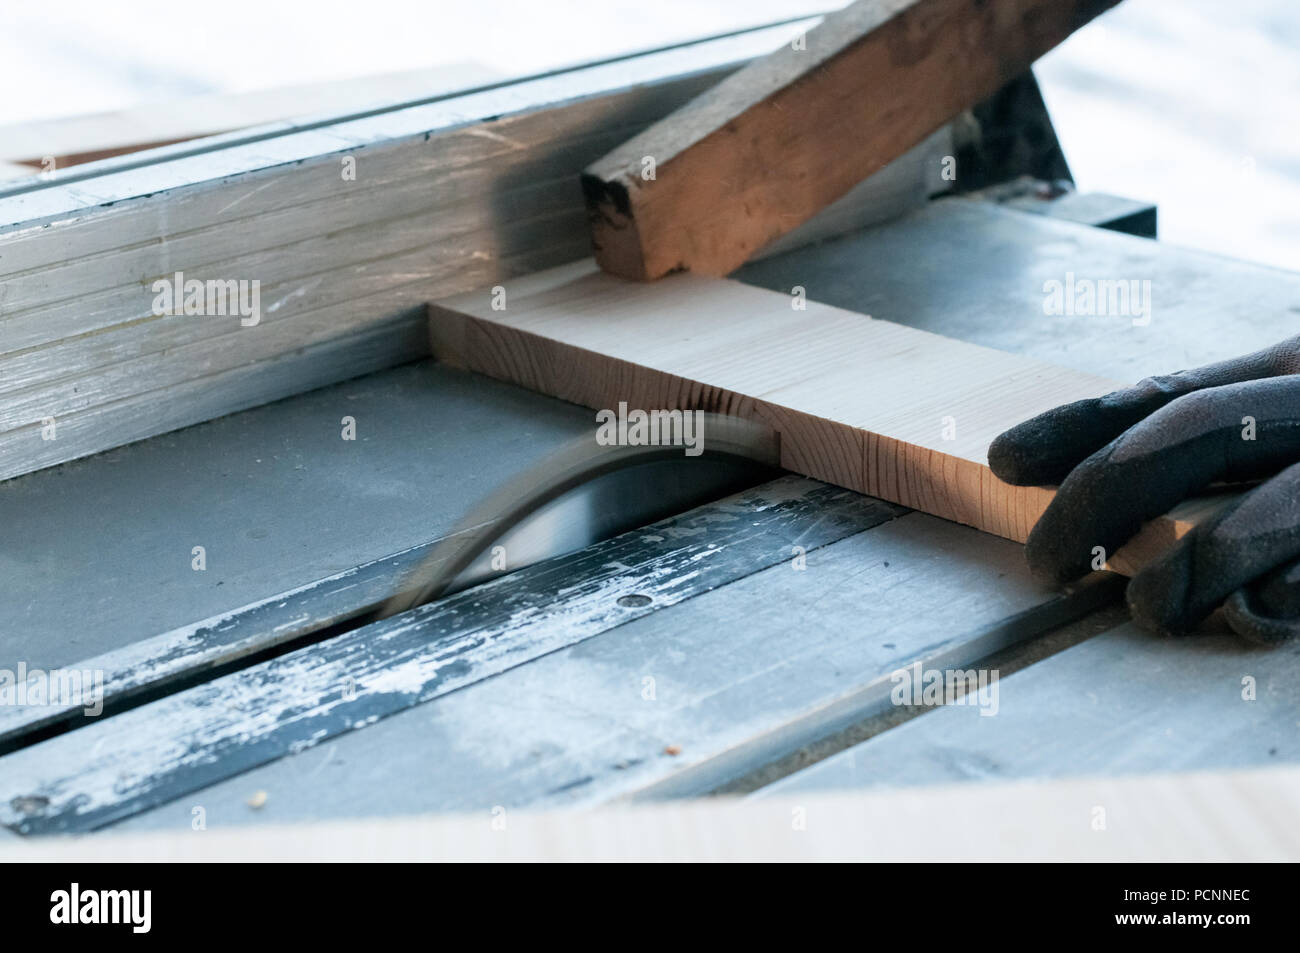 An action shot of a carpenter cutting wood using a wood cutting blade Stock Photo